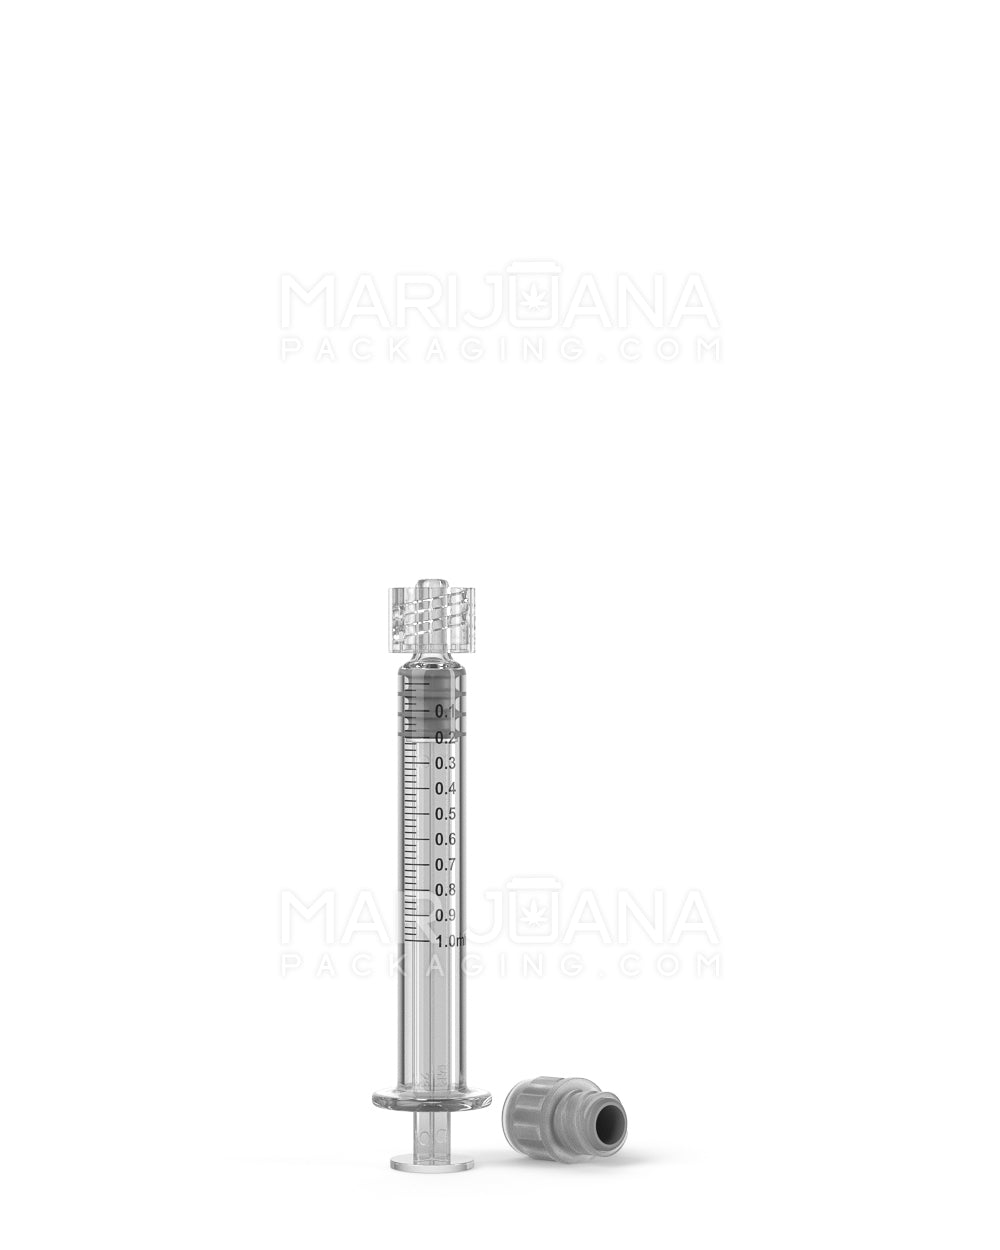 Luer Lock | Long Glass Dab Applicator Syringes | 1mL - 0.1mL Increments - 100 Count - 9